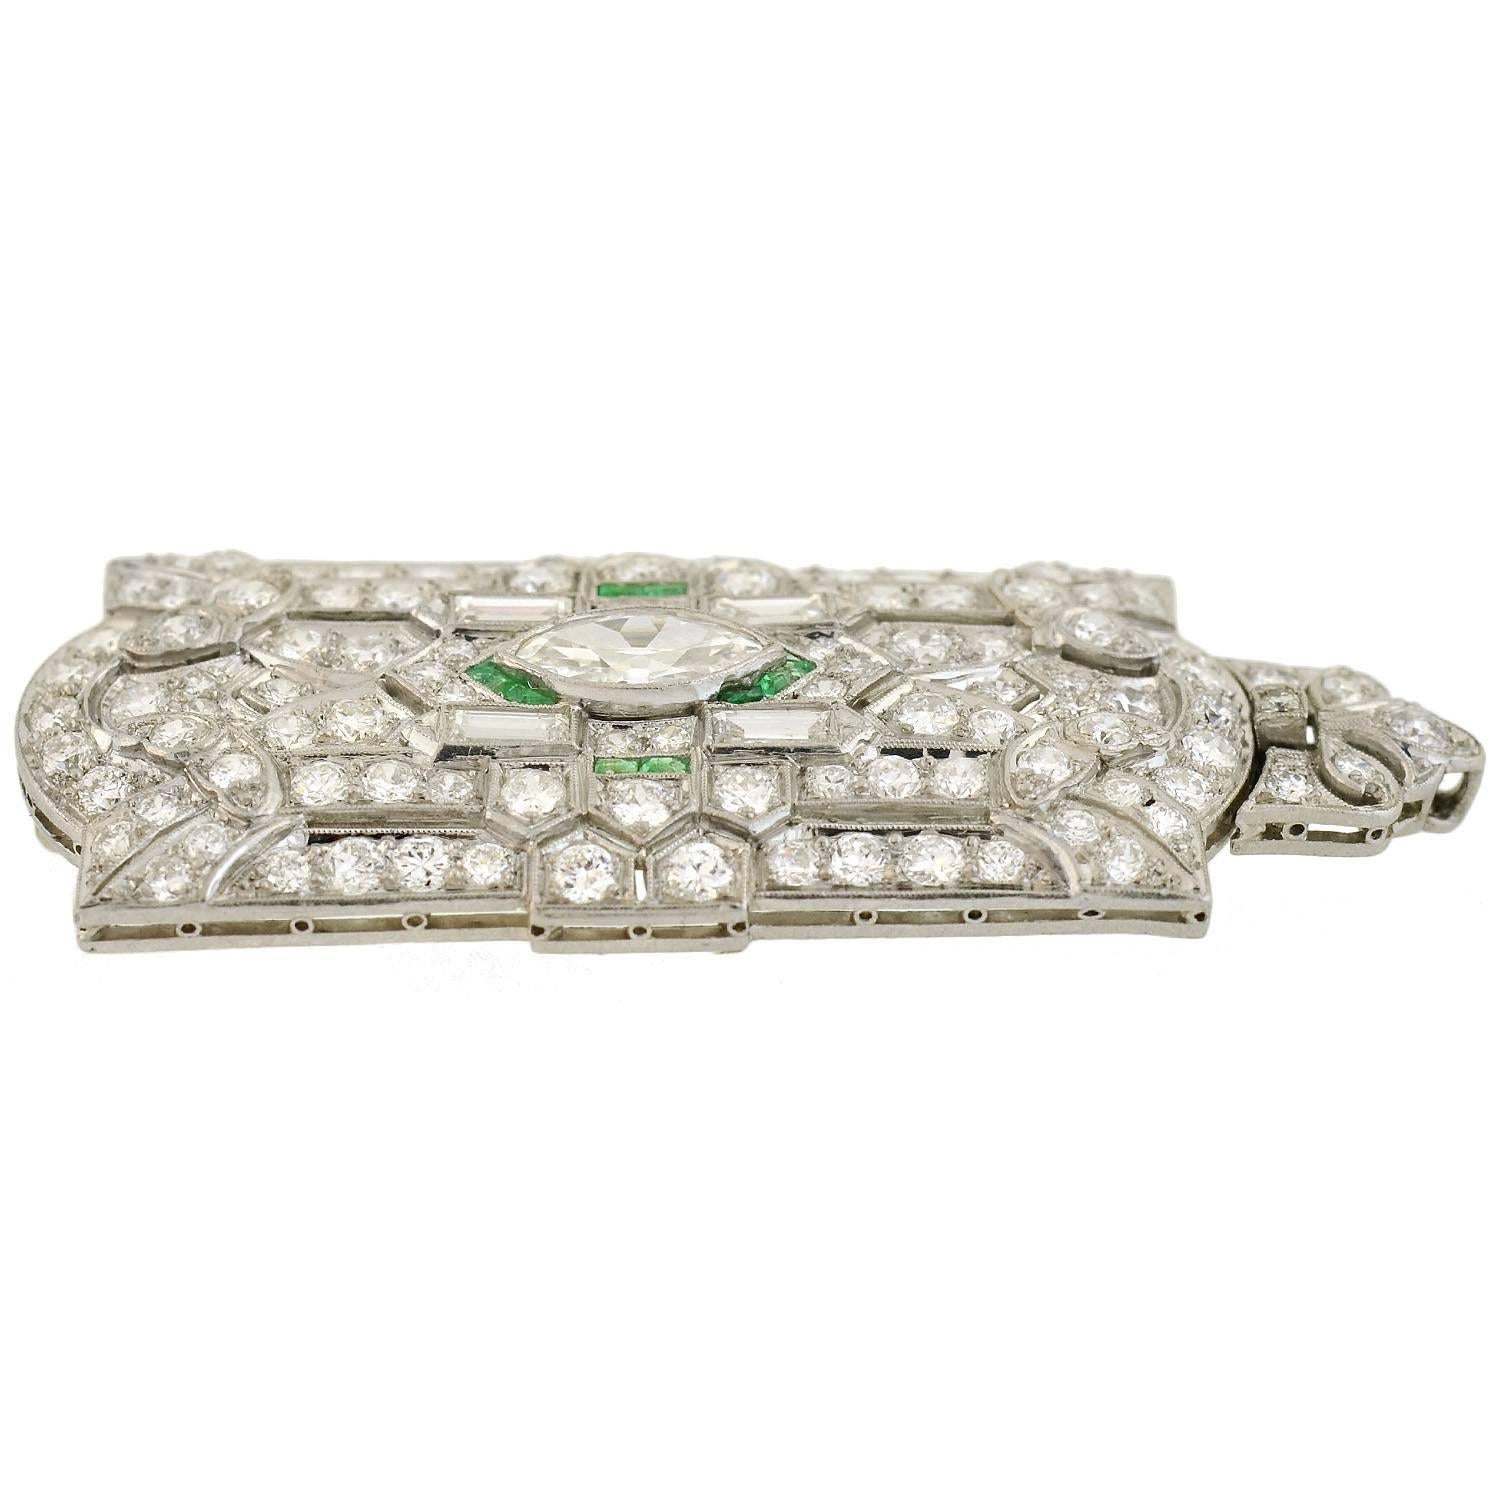 Women's Art Deco Emerald Diamond Encrusted Pin or Pendant with Removable Bail